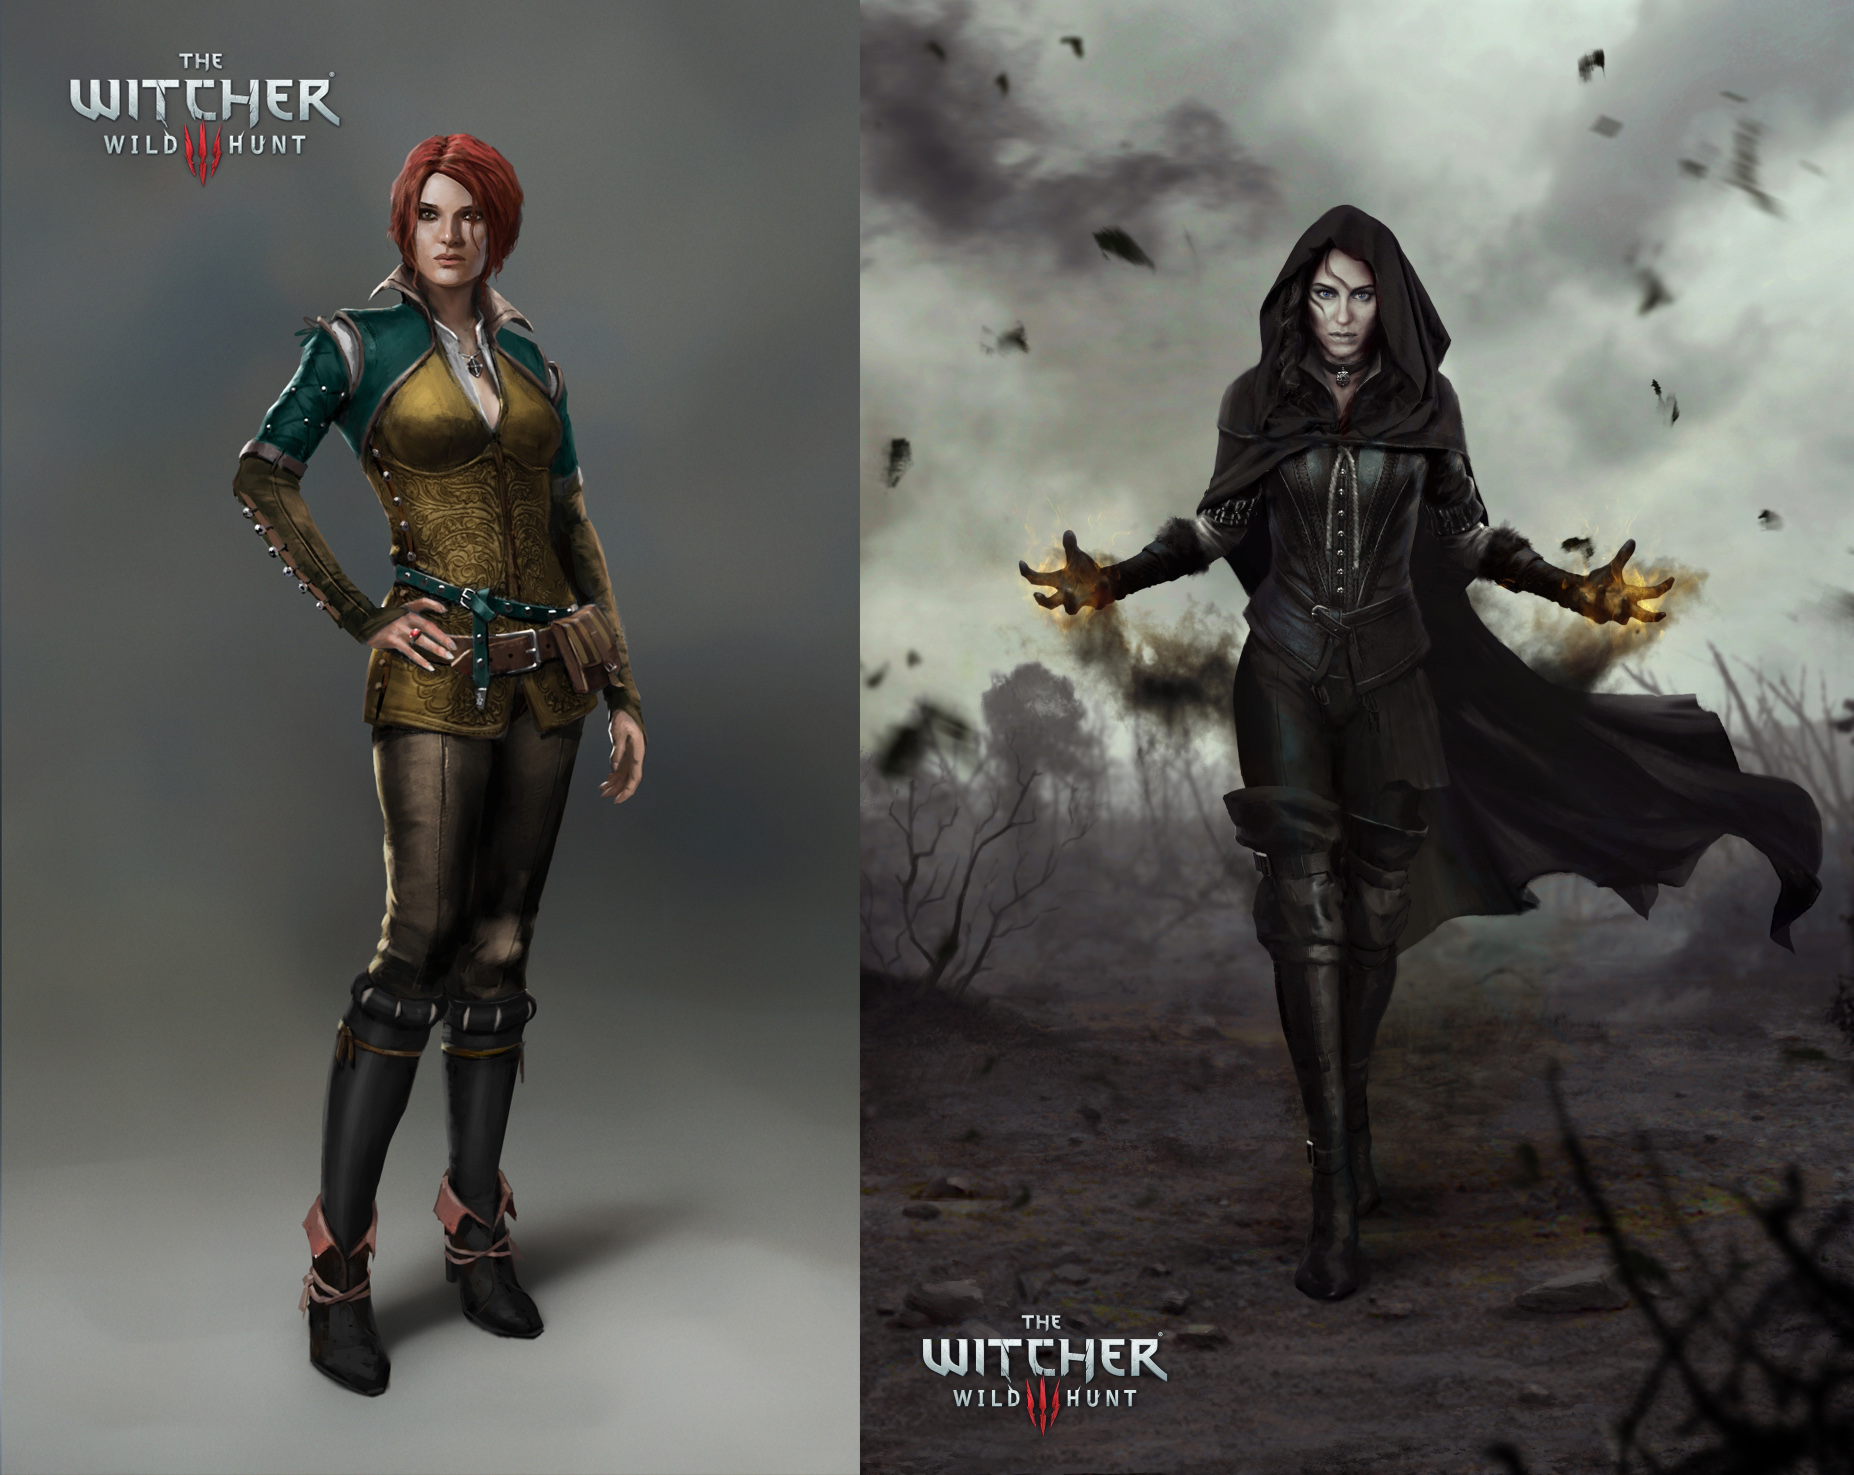 Alfa Img Showing Triss The Witcher Wallpaper HD